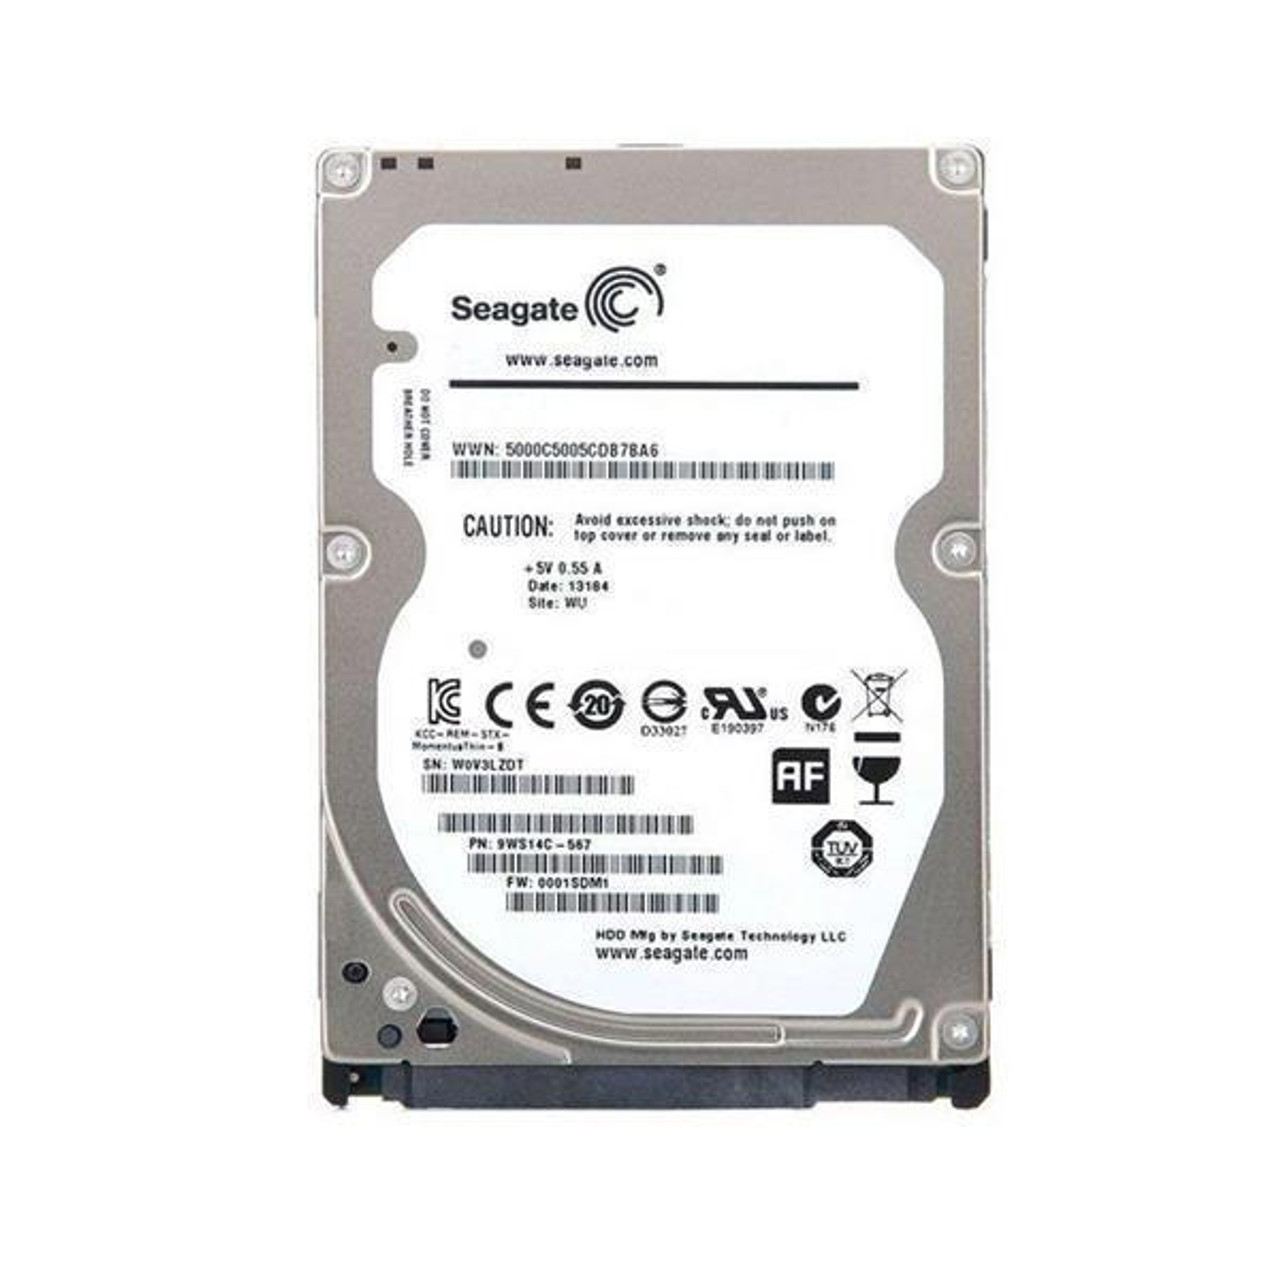 Where to Buy Seagate Products